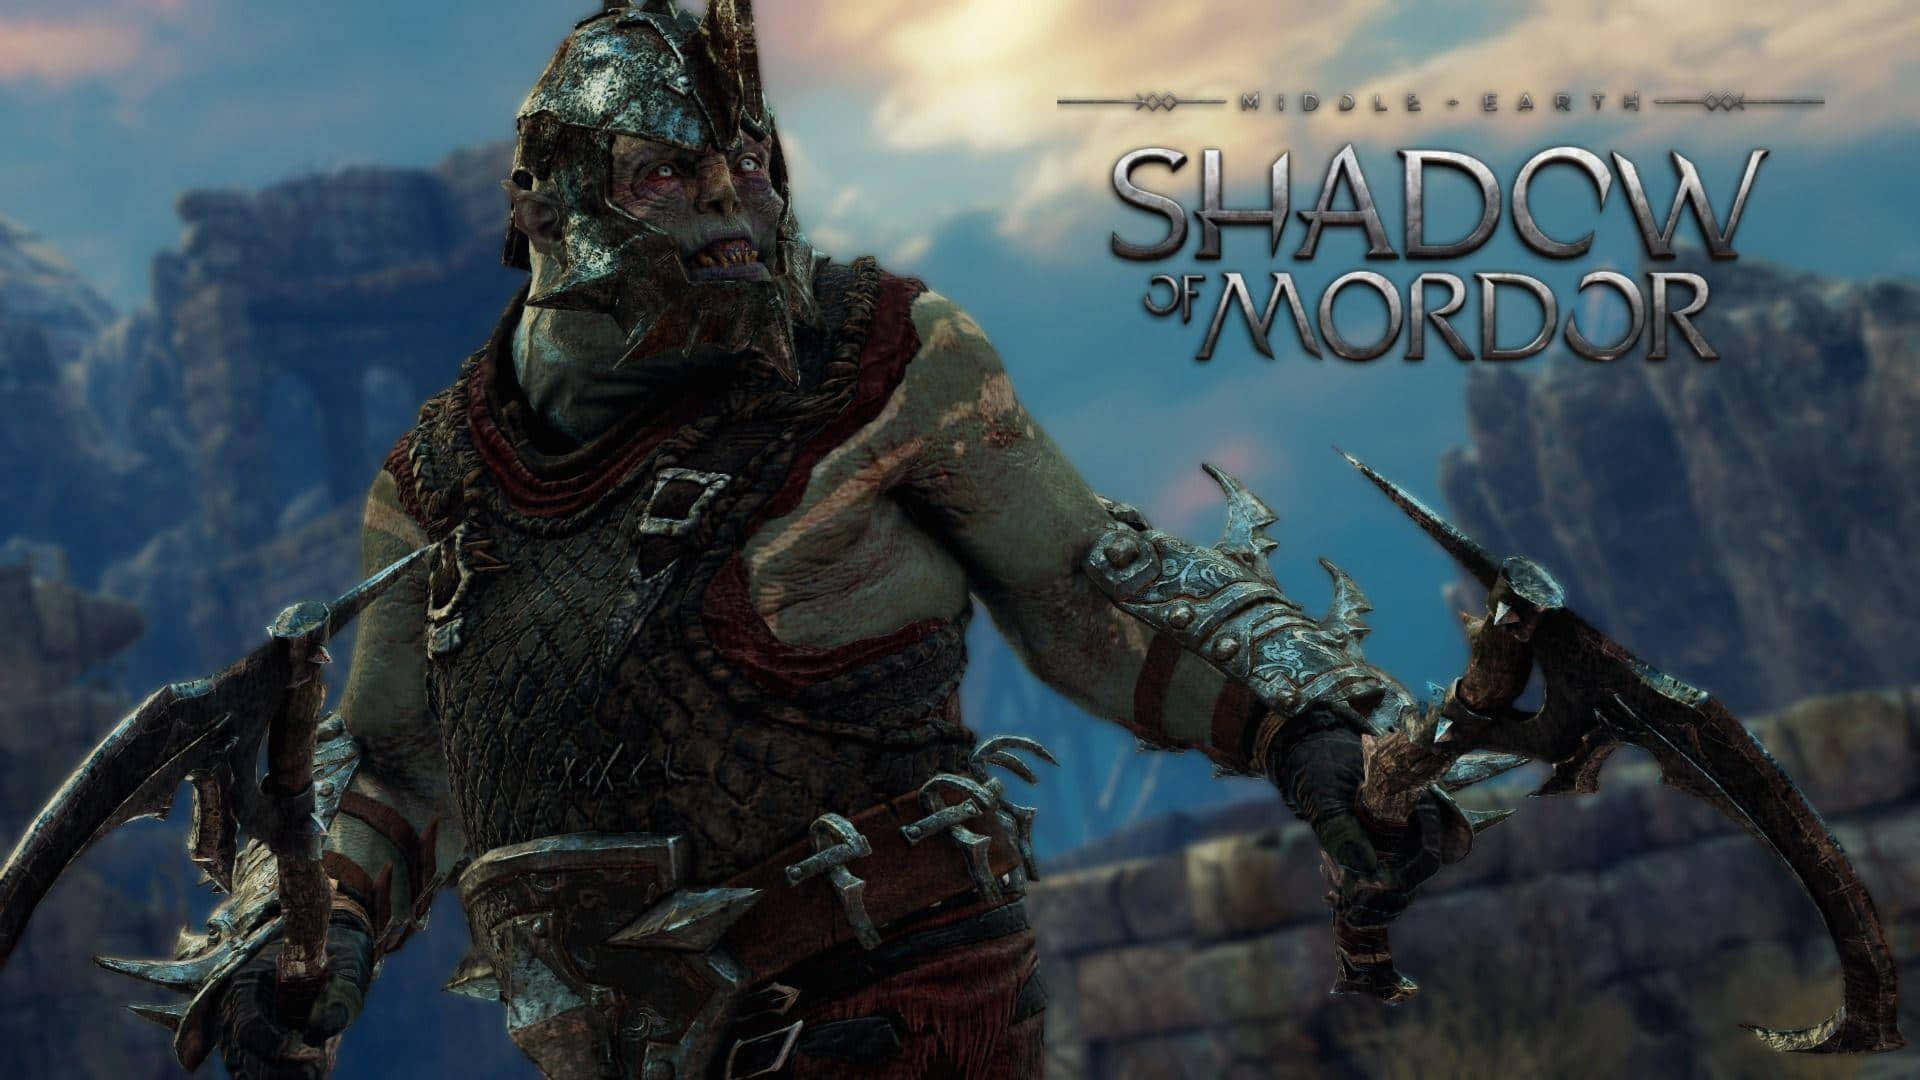 Venture into the gritty world of Middle-earth with Shadow of Mordor